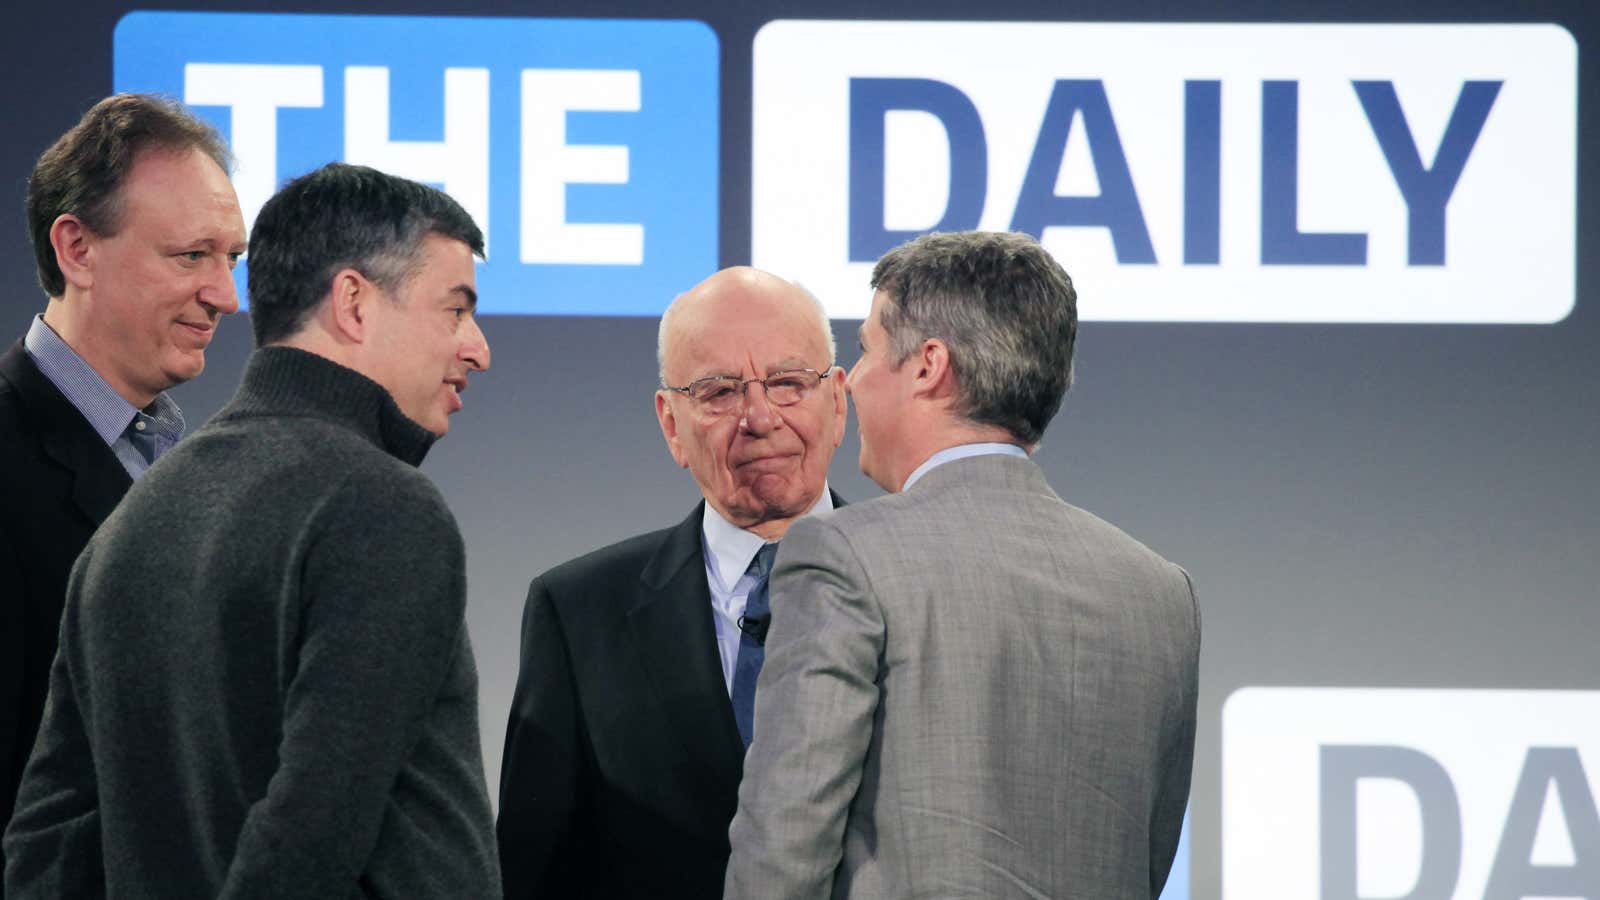 In better days: former News Corp. CDO Jon Miller, Apple SVP Eddy Cue, News Corp. CEO Rupert Murdoch, and The Daily editor-in-chief Jesse Angelo